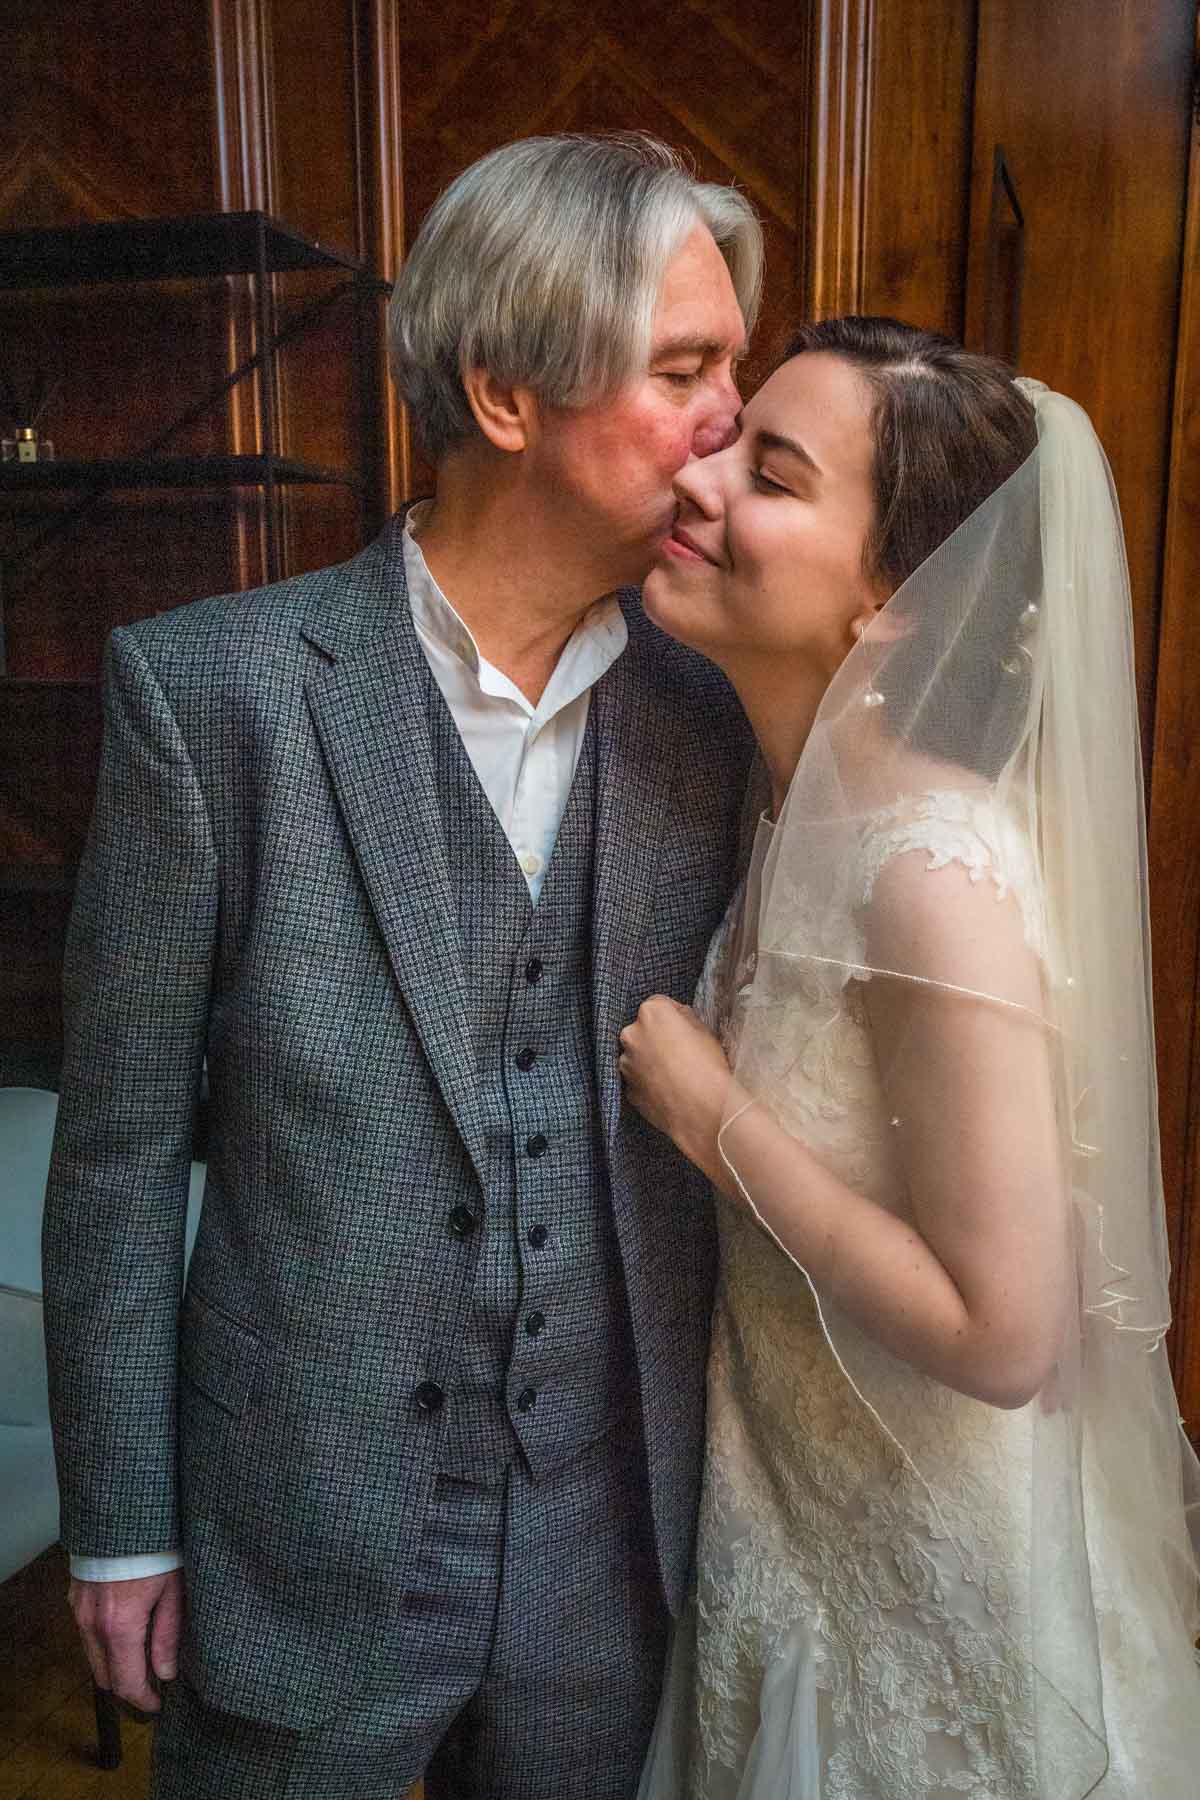 The father of the bride kisses her at a short wedding in London